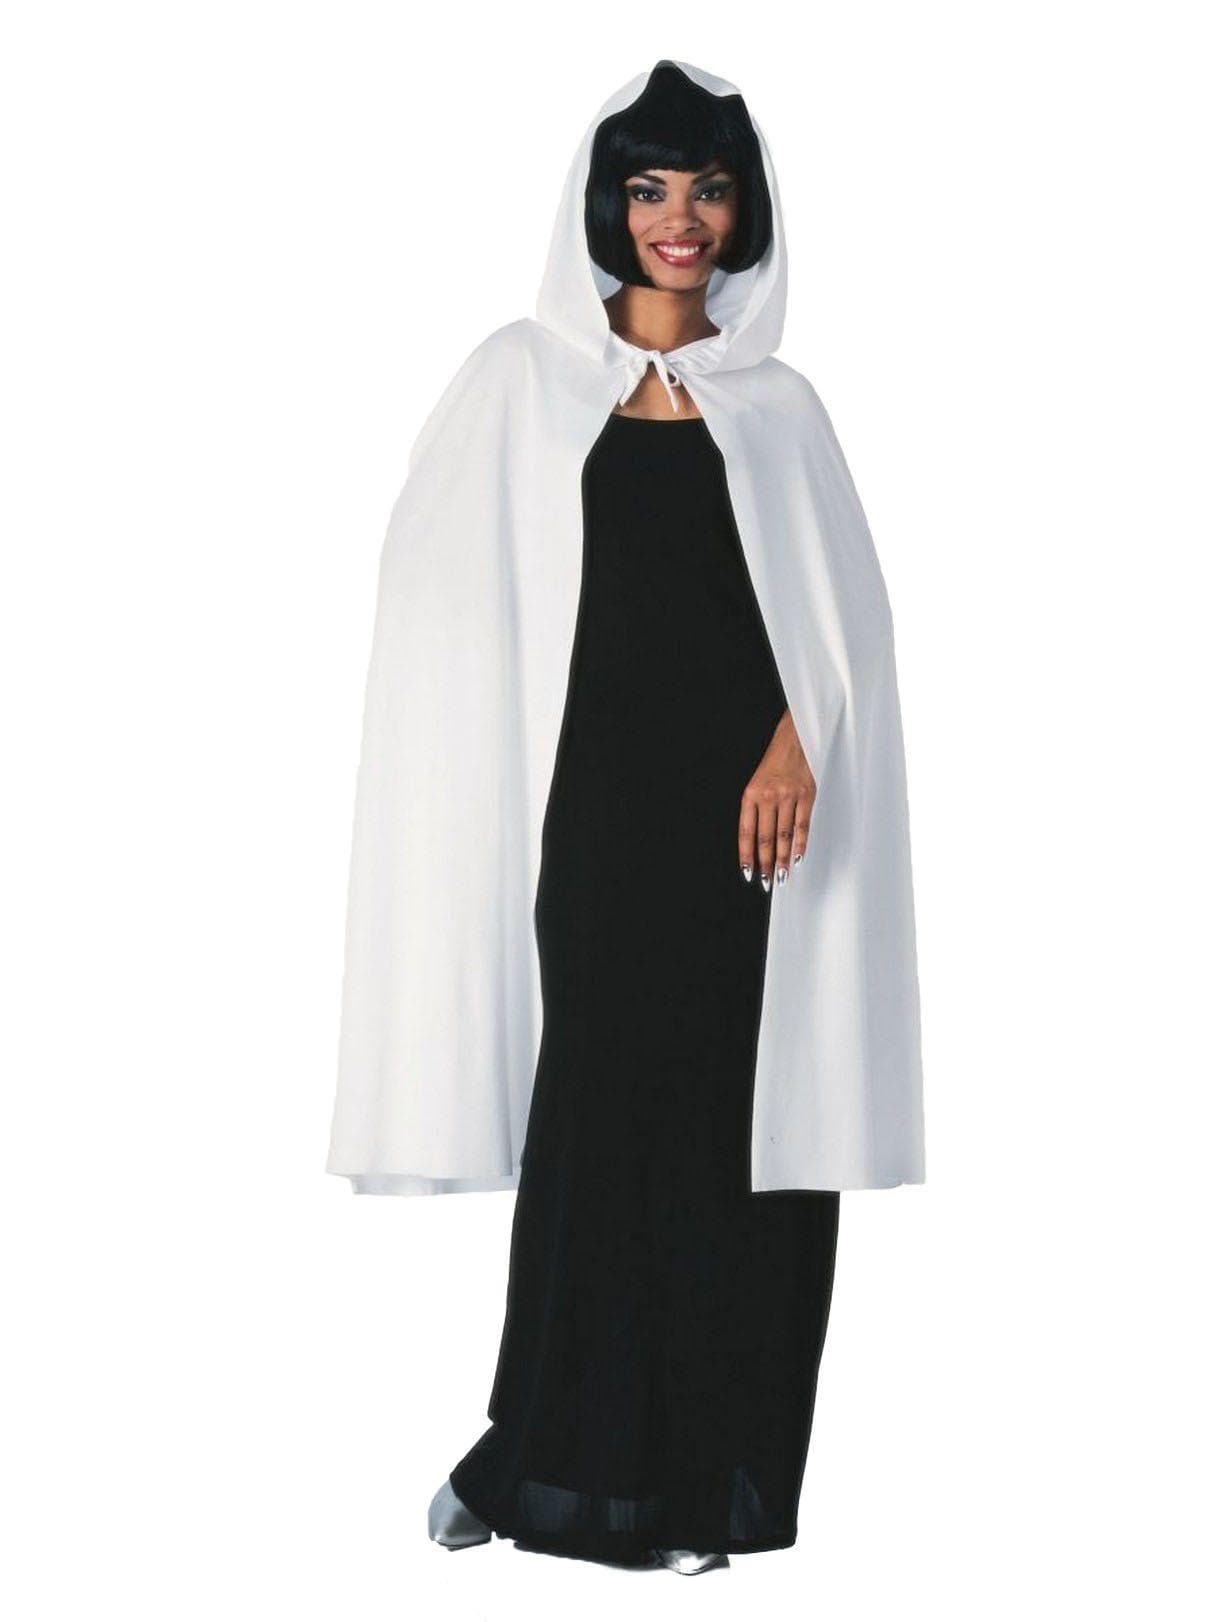 Adult Short White Hooded Cape - costumes.com